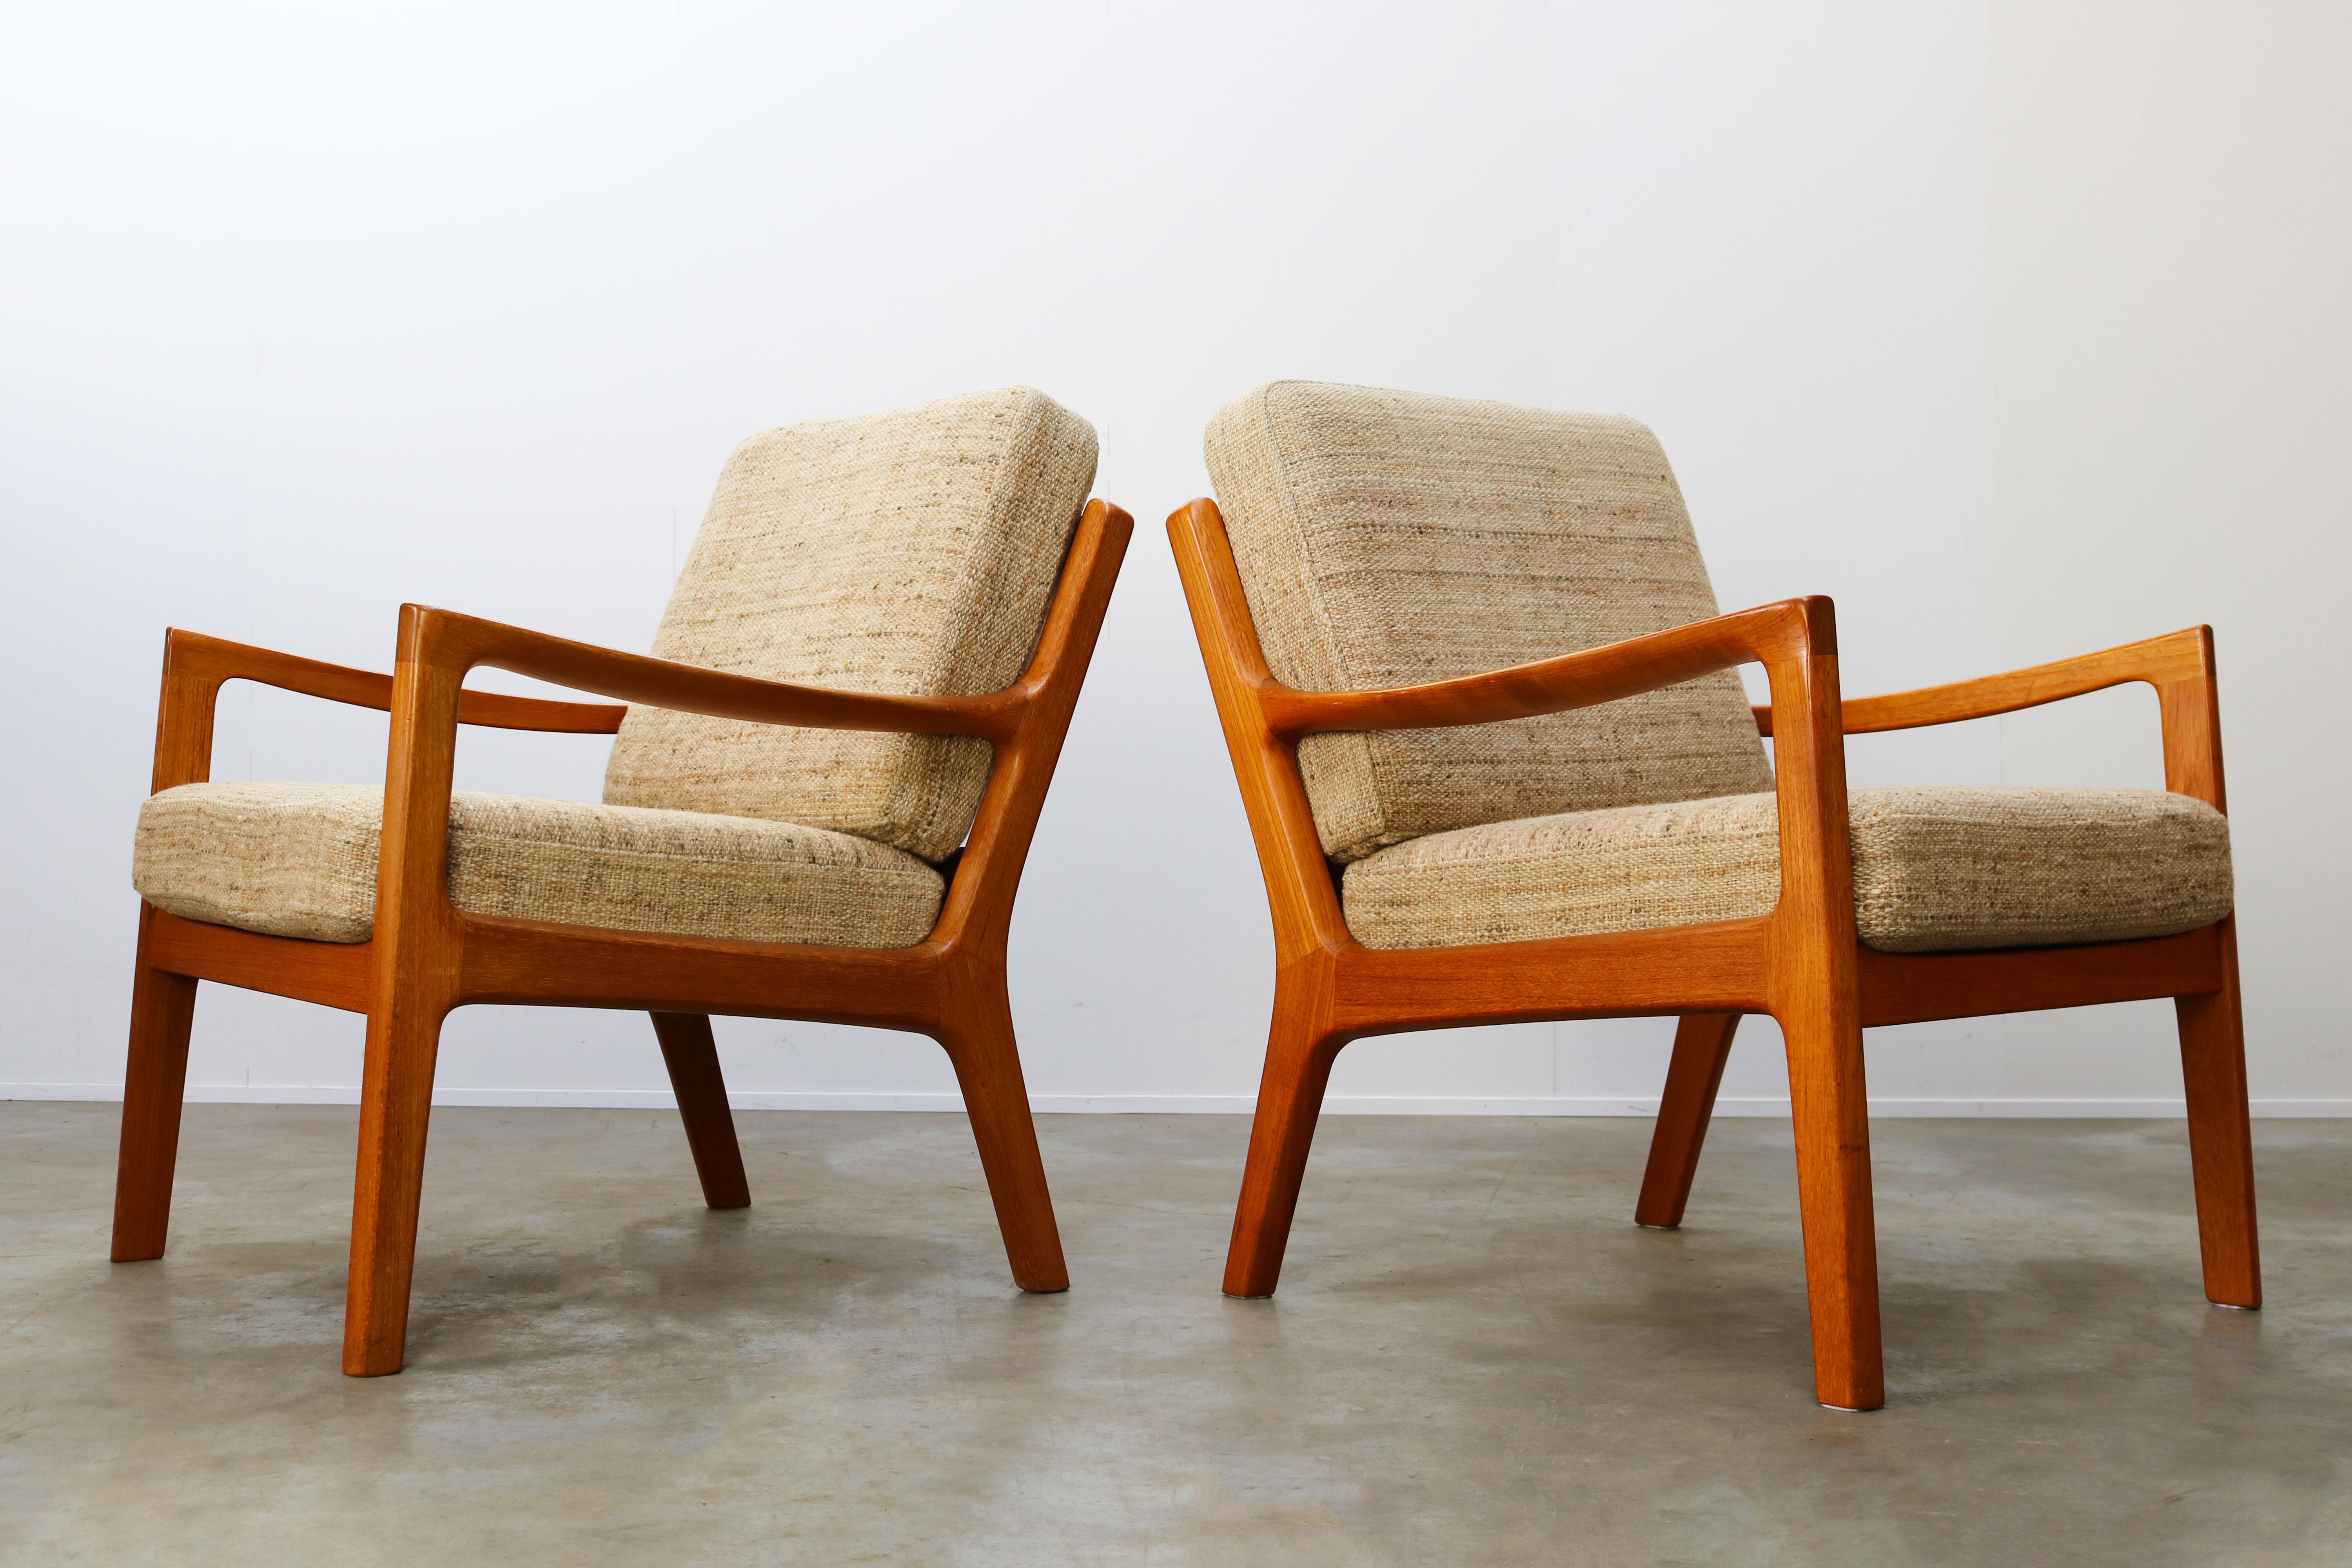 Wonderful pair of Danish design ''Senator'' lounge chairs in teak by Ole Wanscher produced by P. Jeppesen in the 1950s. The chairs have a solid teak organic sculpted frame and their original white wool with grey / beige upholstery. Chairs are in